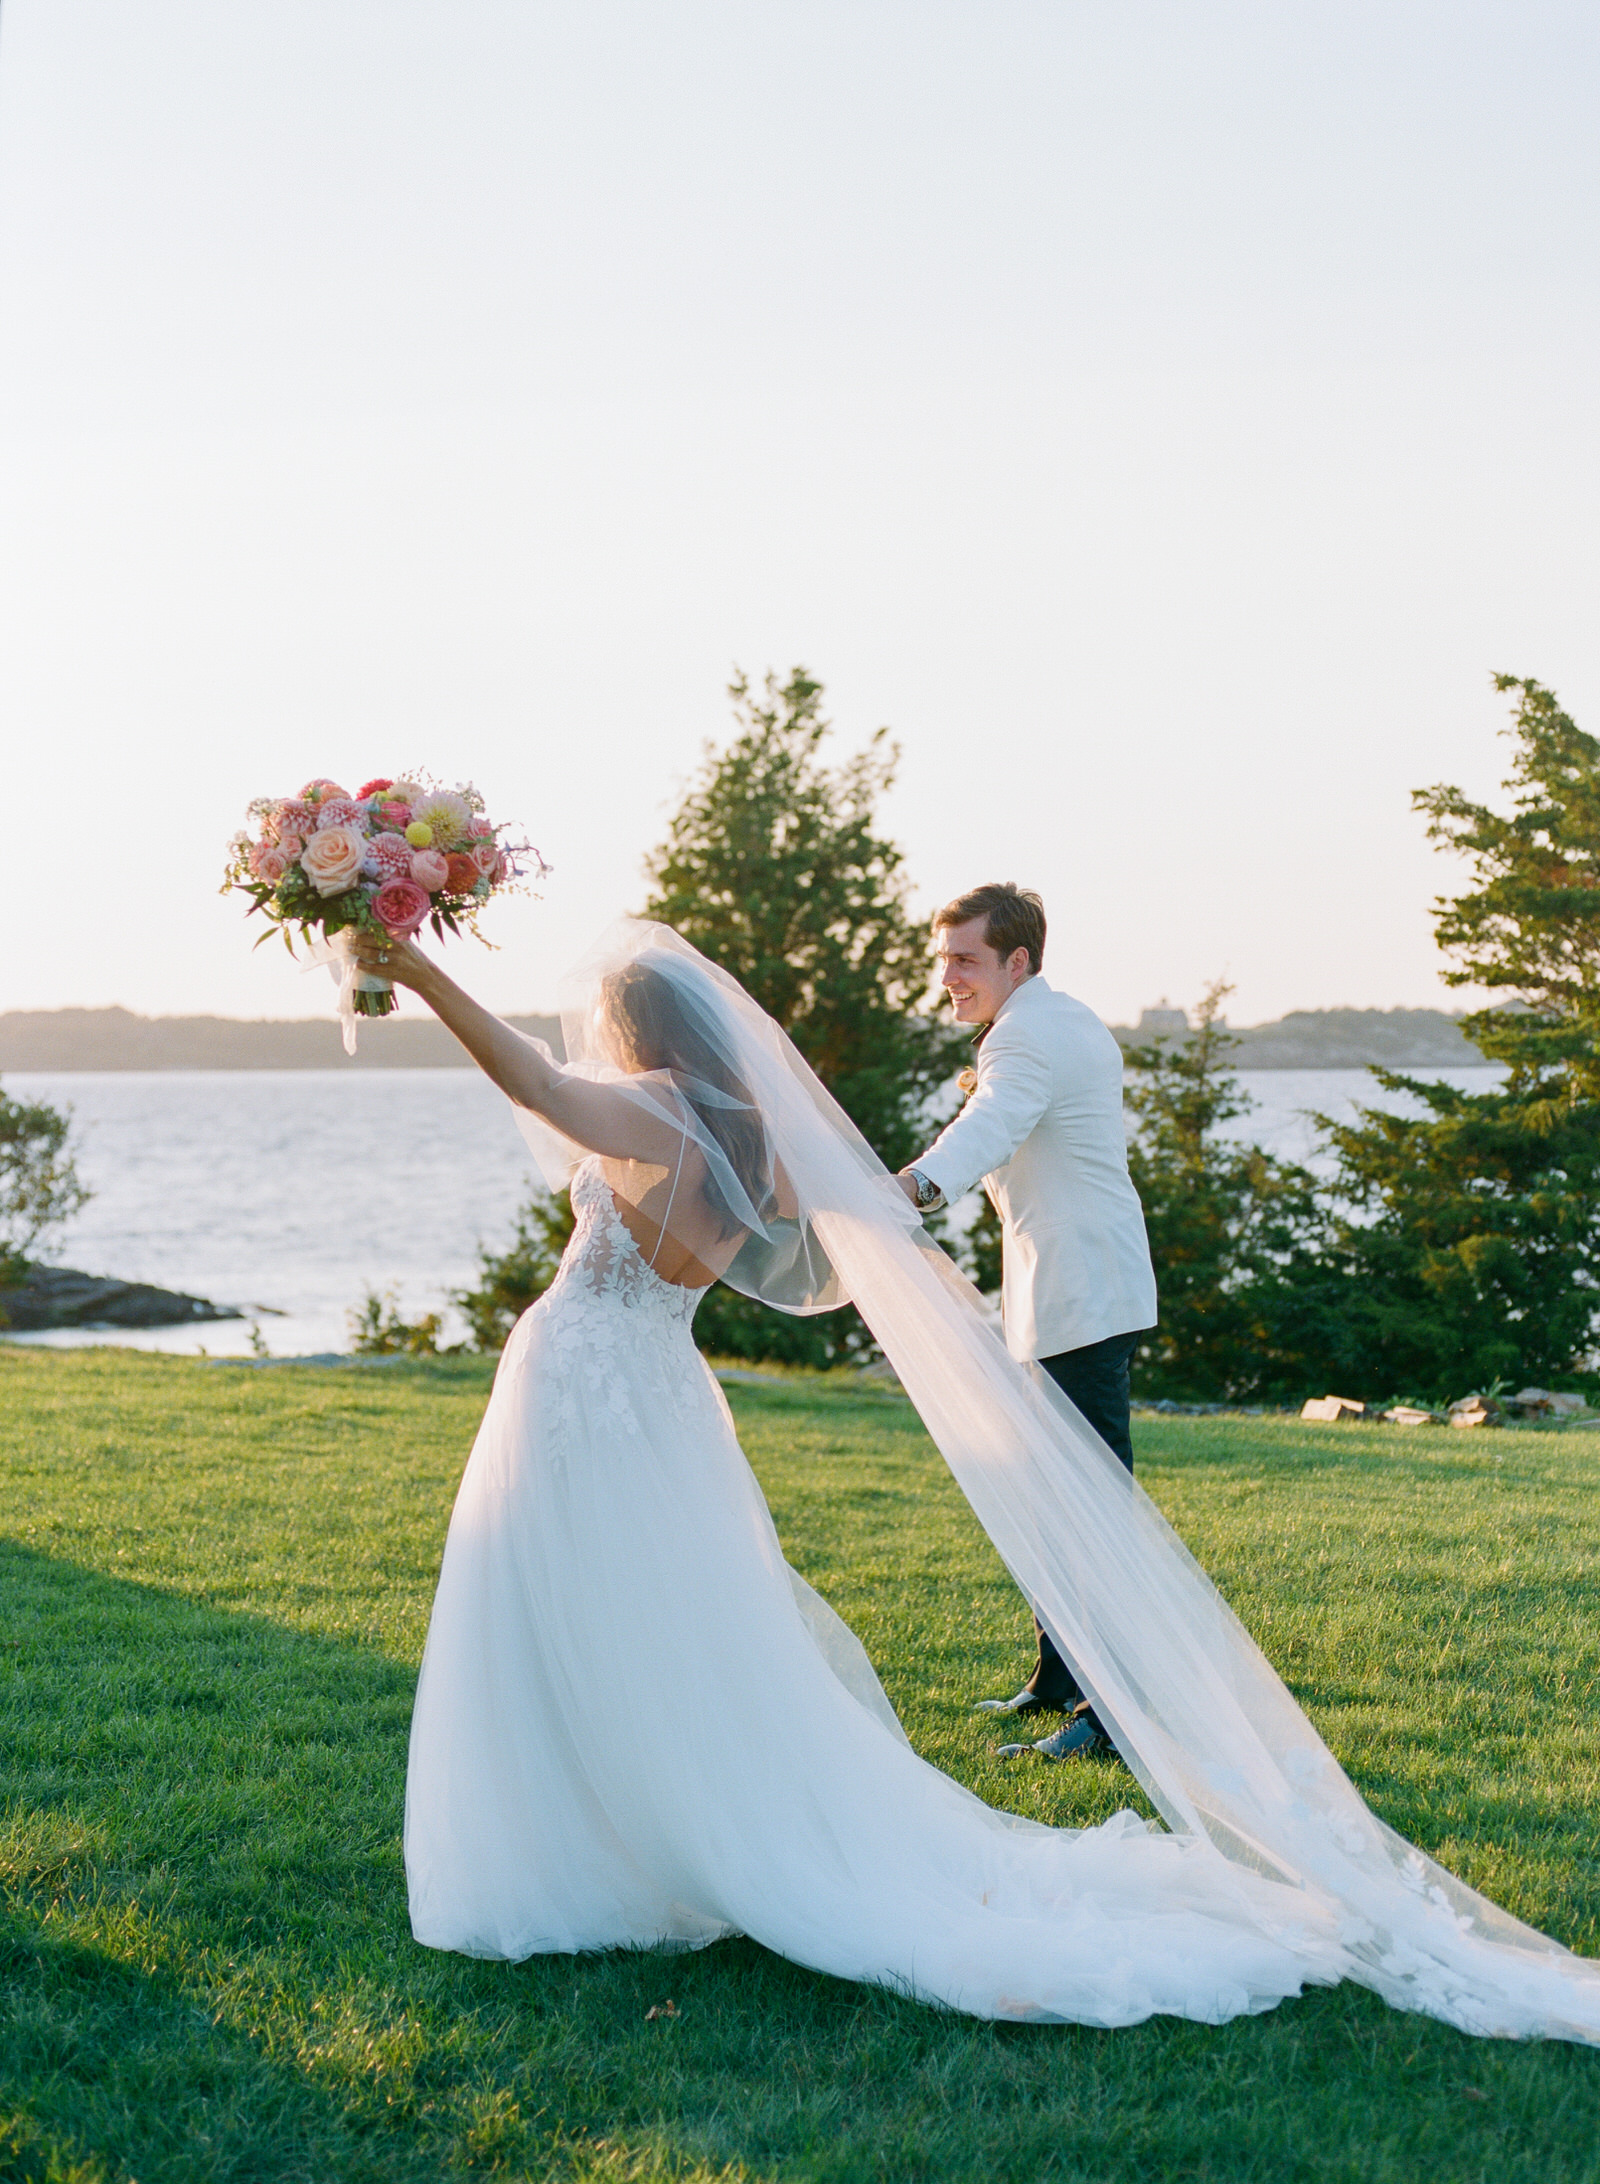 A Bright, Fun, and Romantic Wedding at Castle Hill Inn - Over The Moon